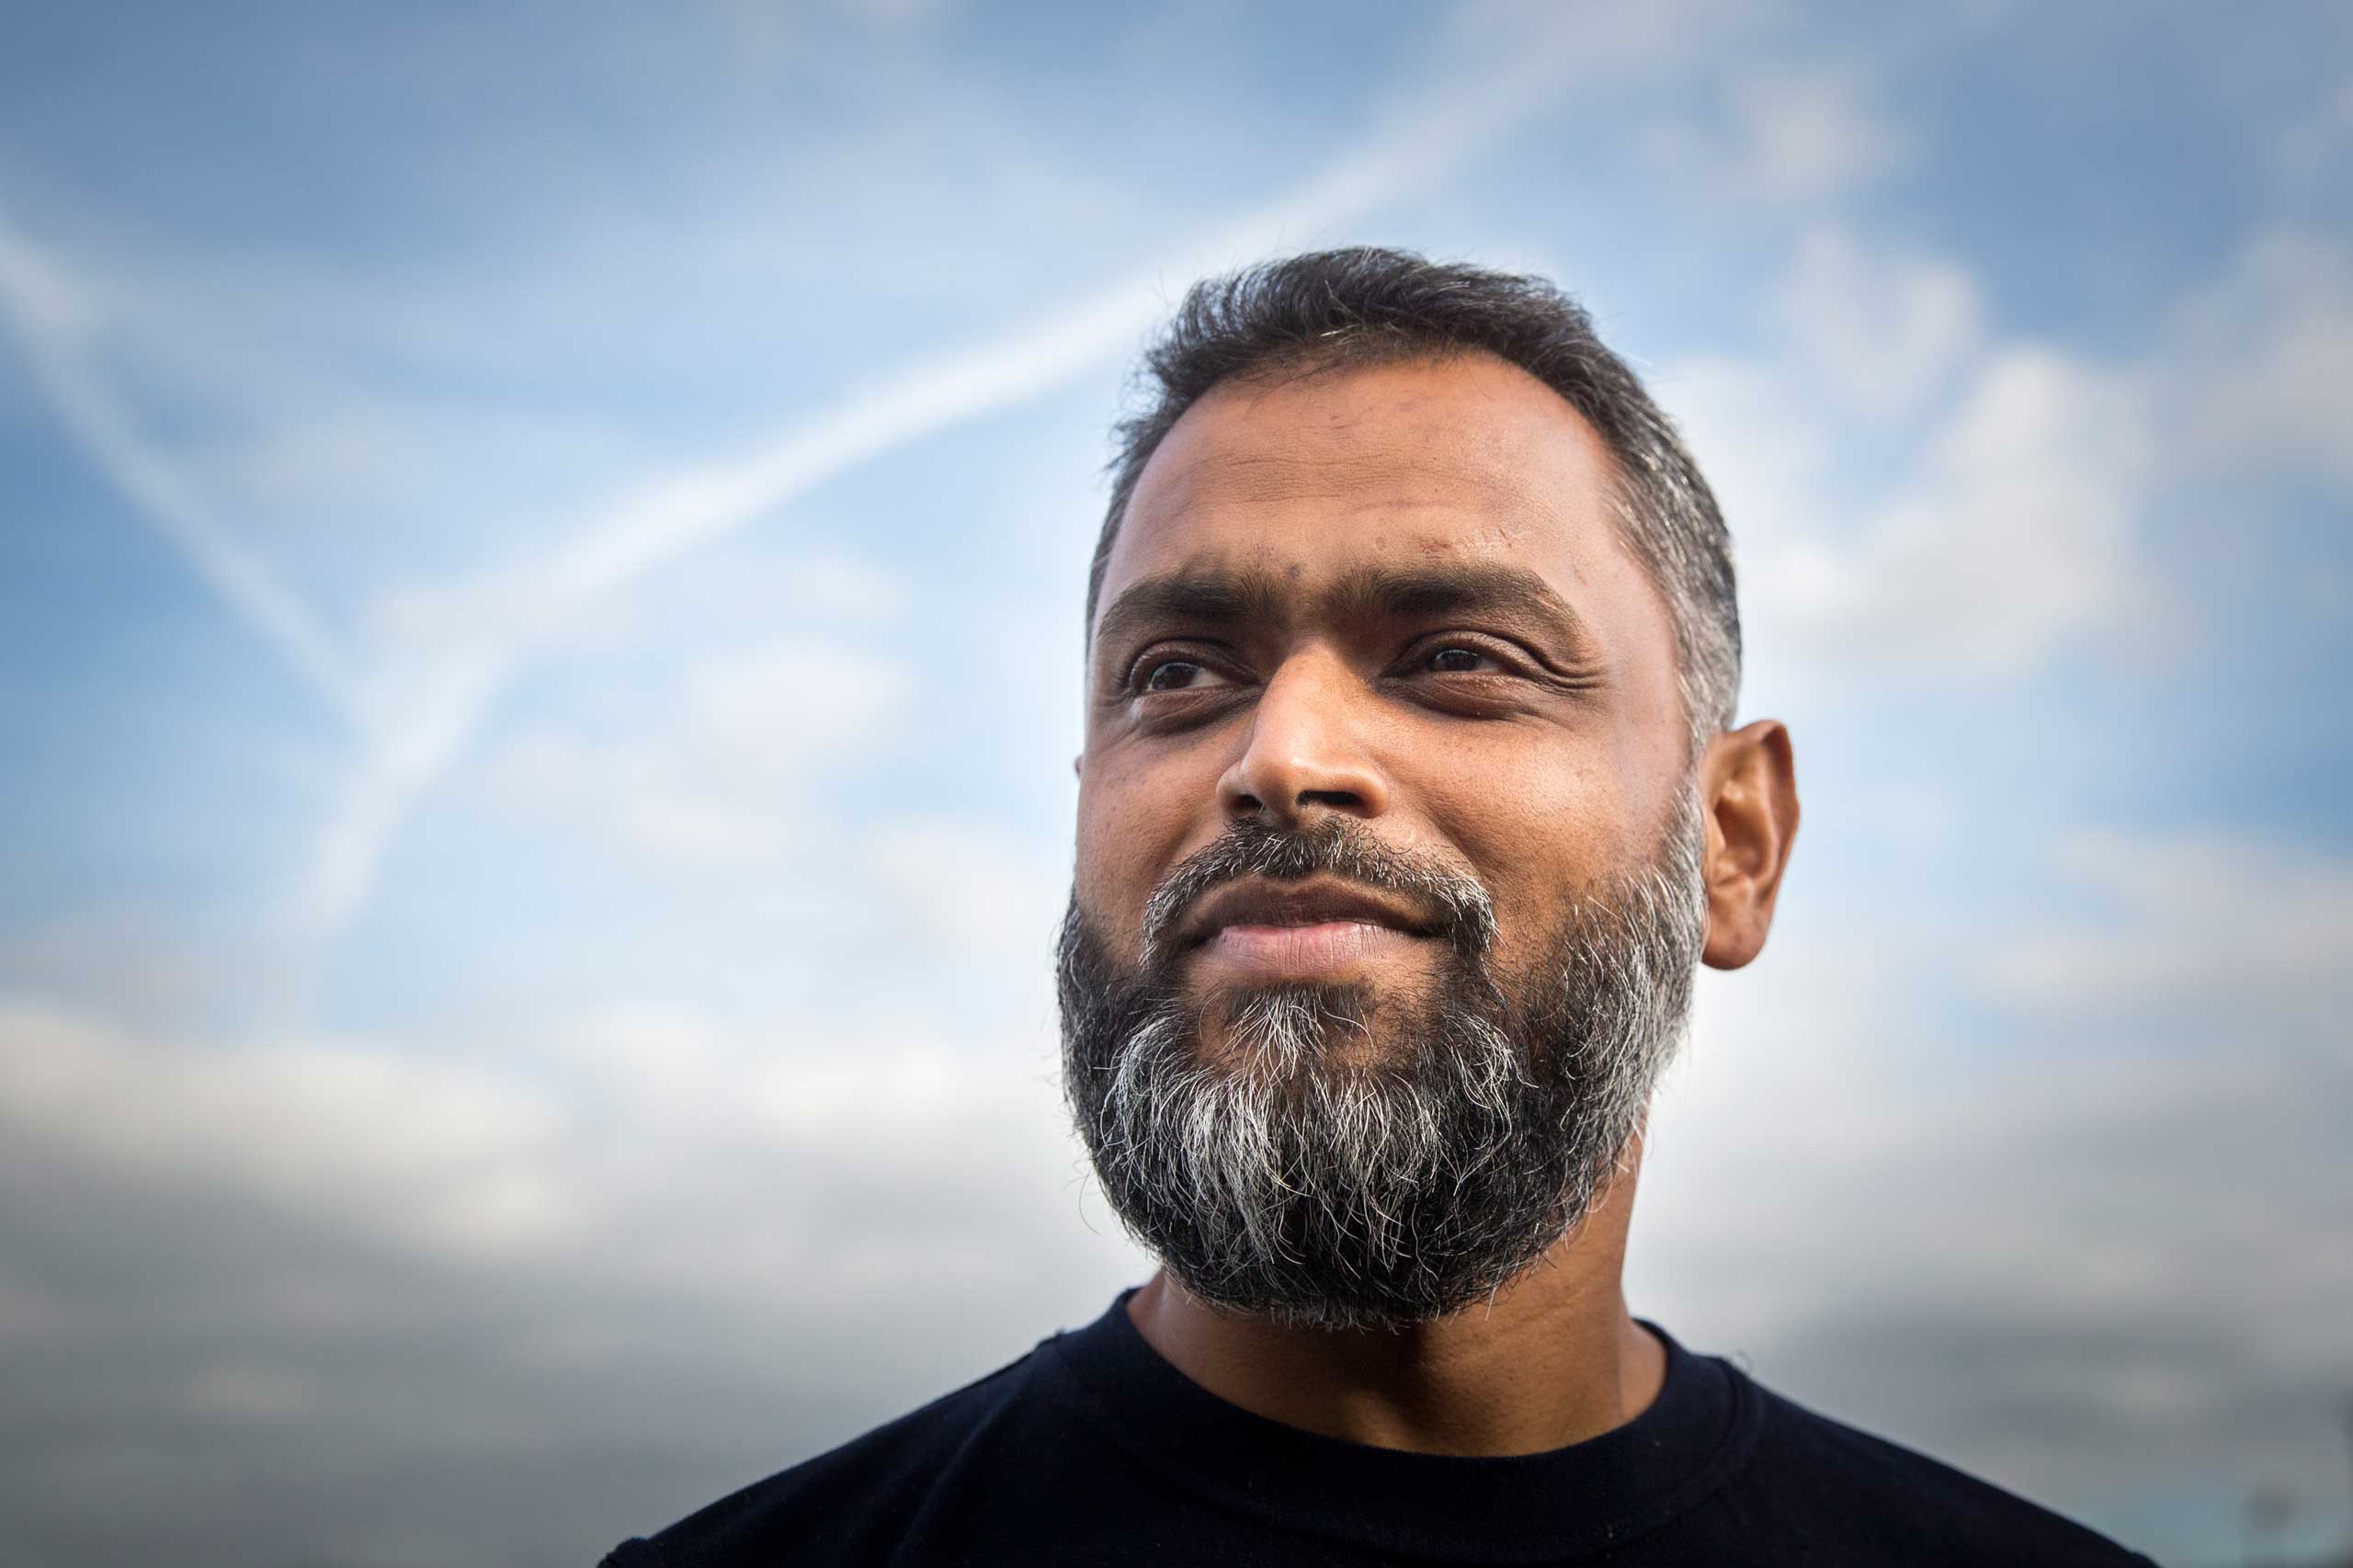 Moazzam Begg, a Pakistani-British man who spent three years in Guantanamo between 2002 and 2005, pictured in London, Oct. 1, 2014. (Rob Stothard—Getty Images)